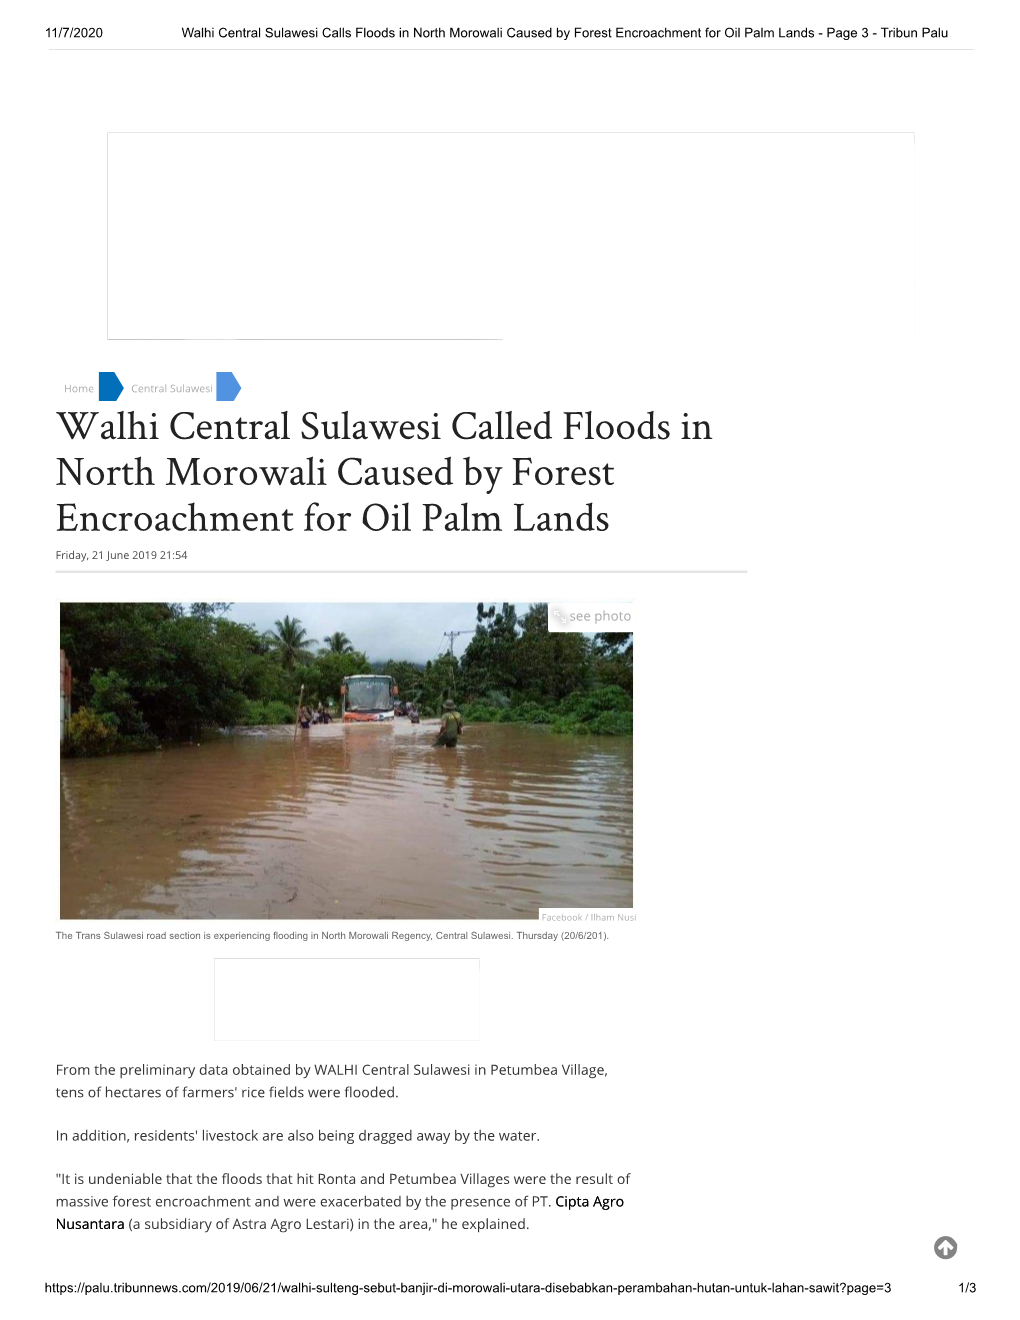 Walhi Central Sulawesi Called Floods in North Morowali Caused by Forest Encroachment for Oil Palm Lands Friday, 21 June 2019 21:54